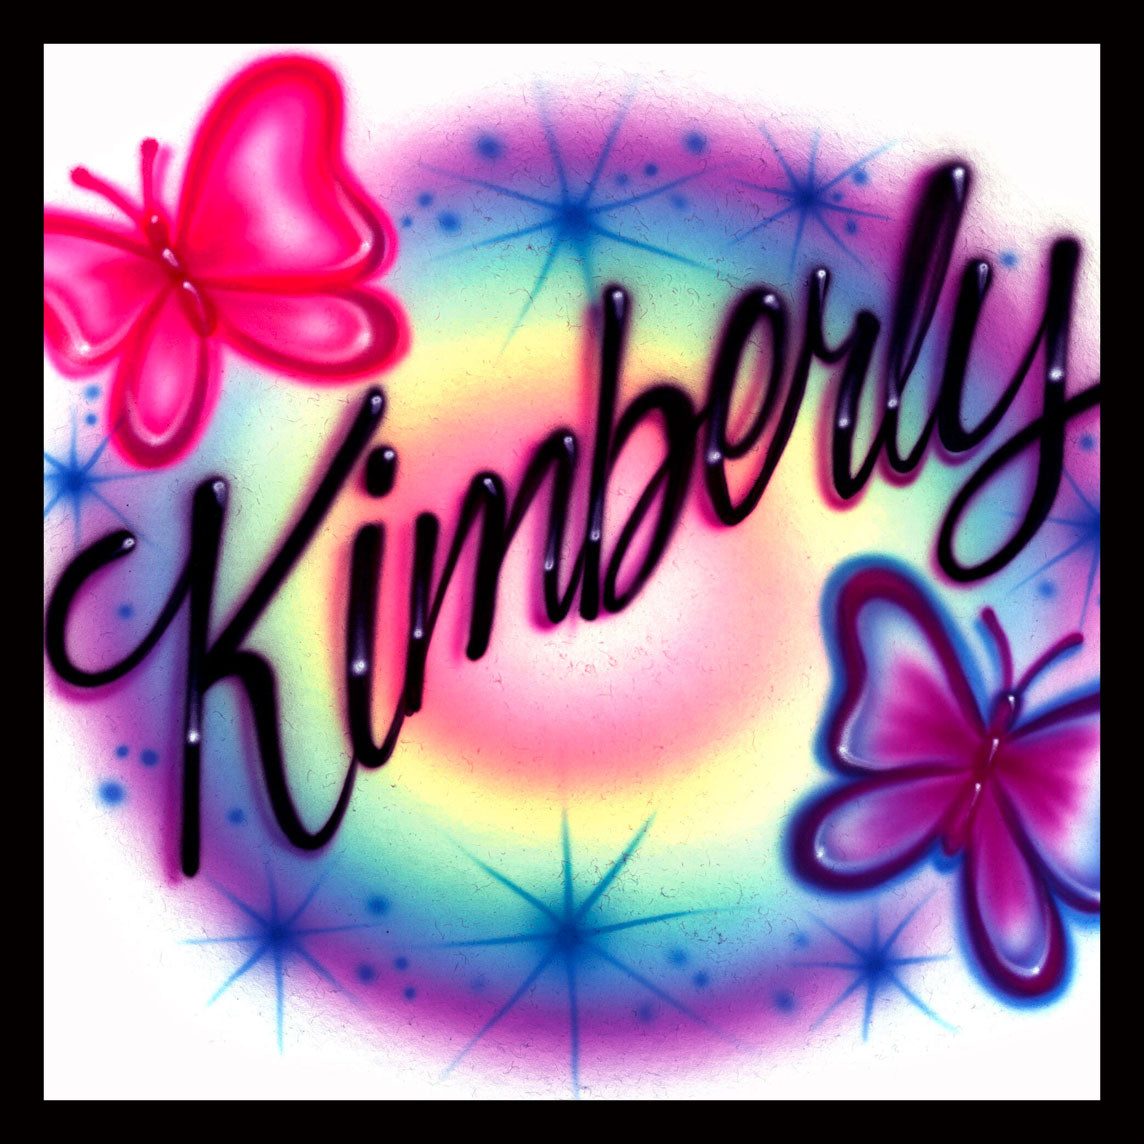 Airbrushed T-shirt * Name with Butterflies * You Choose Color * You Choose Name